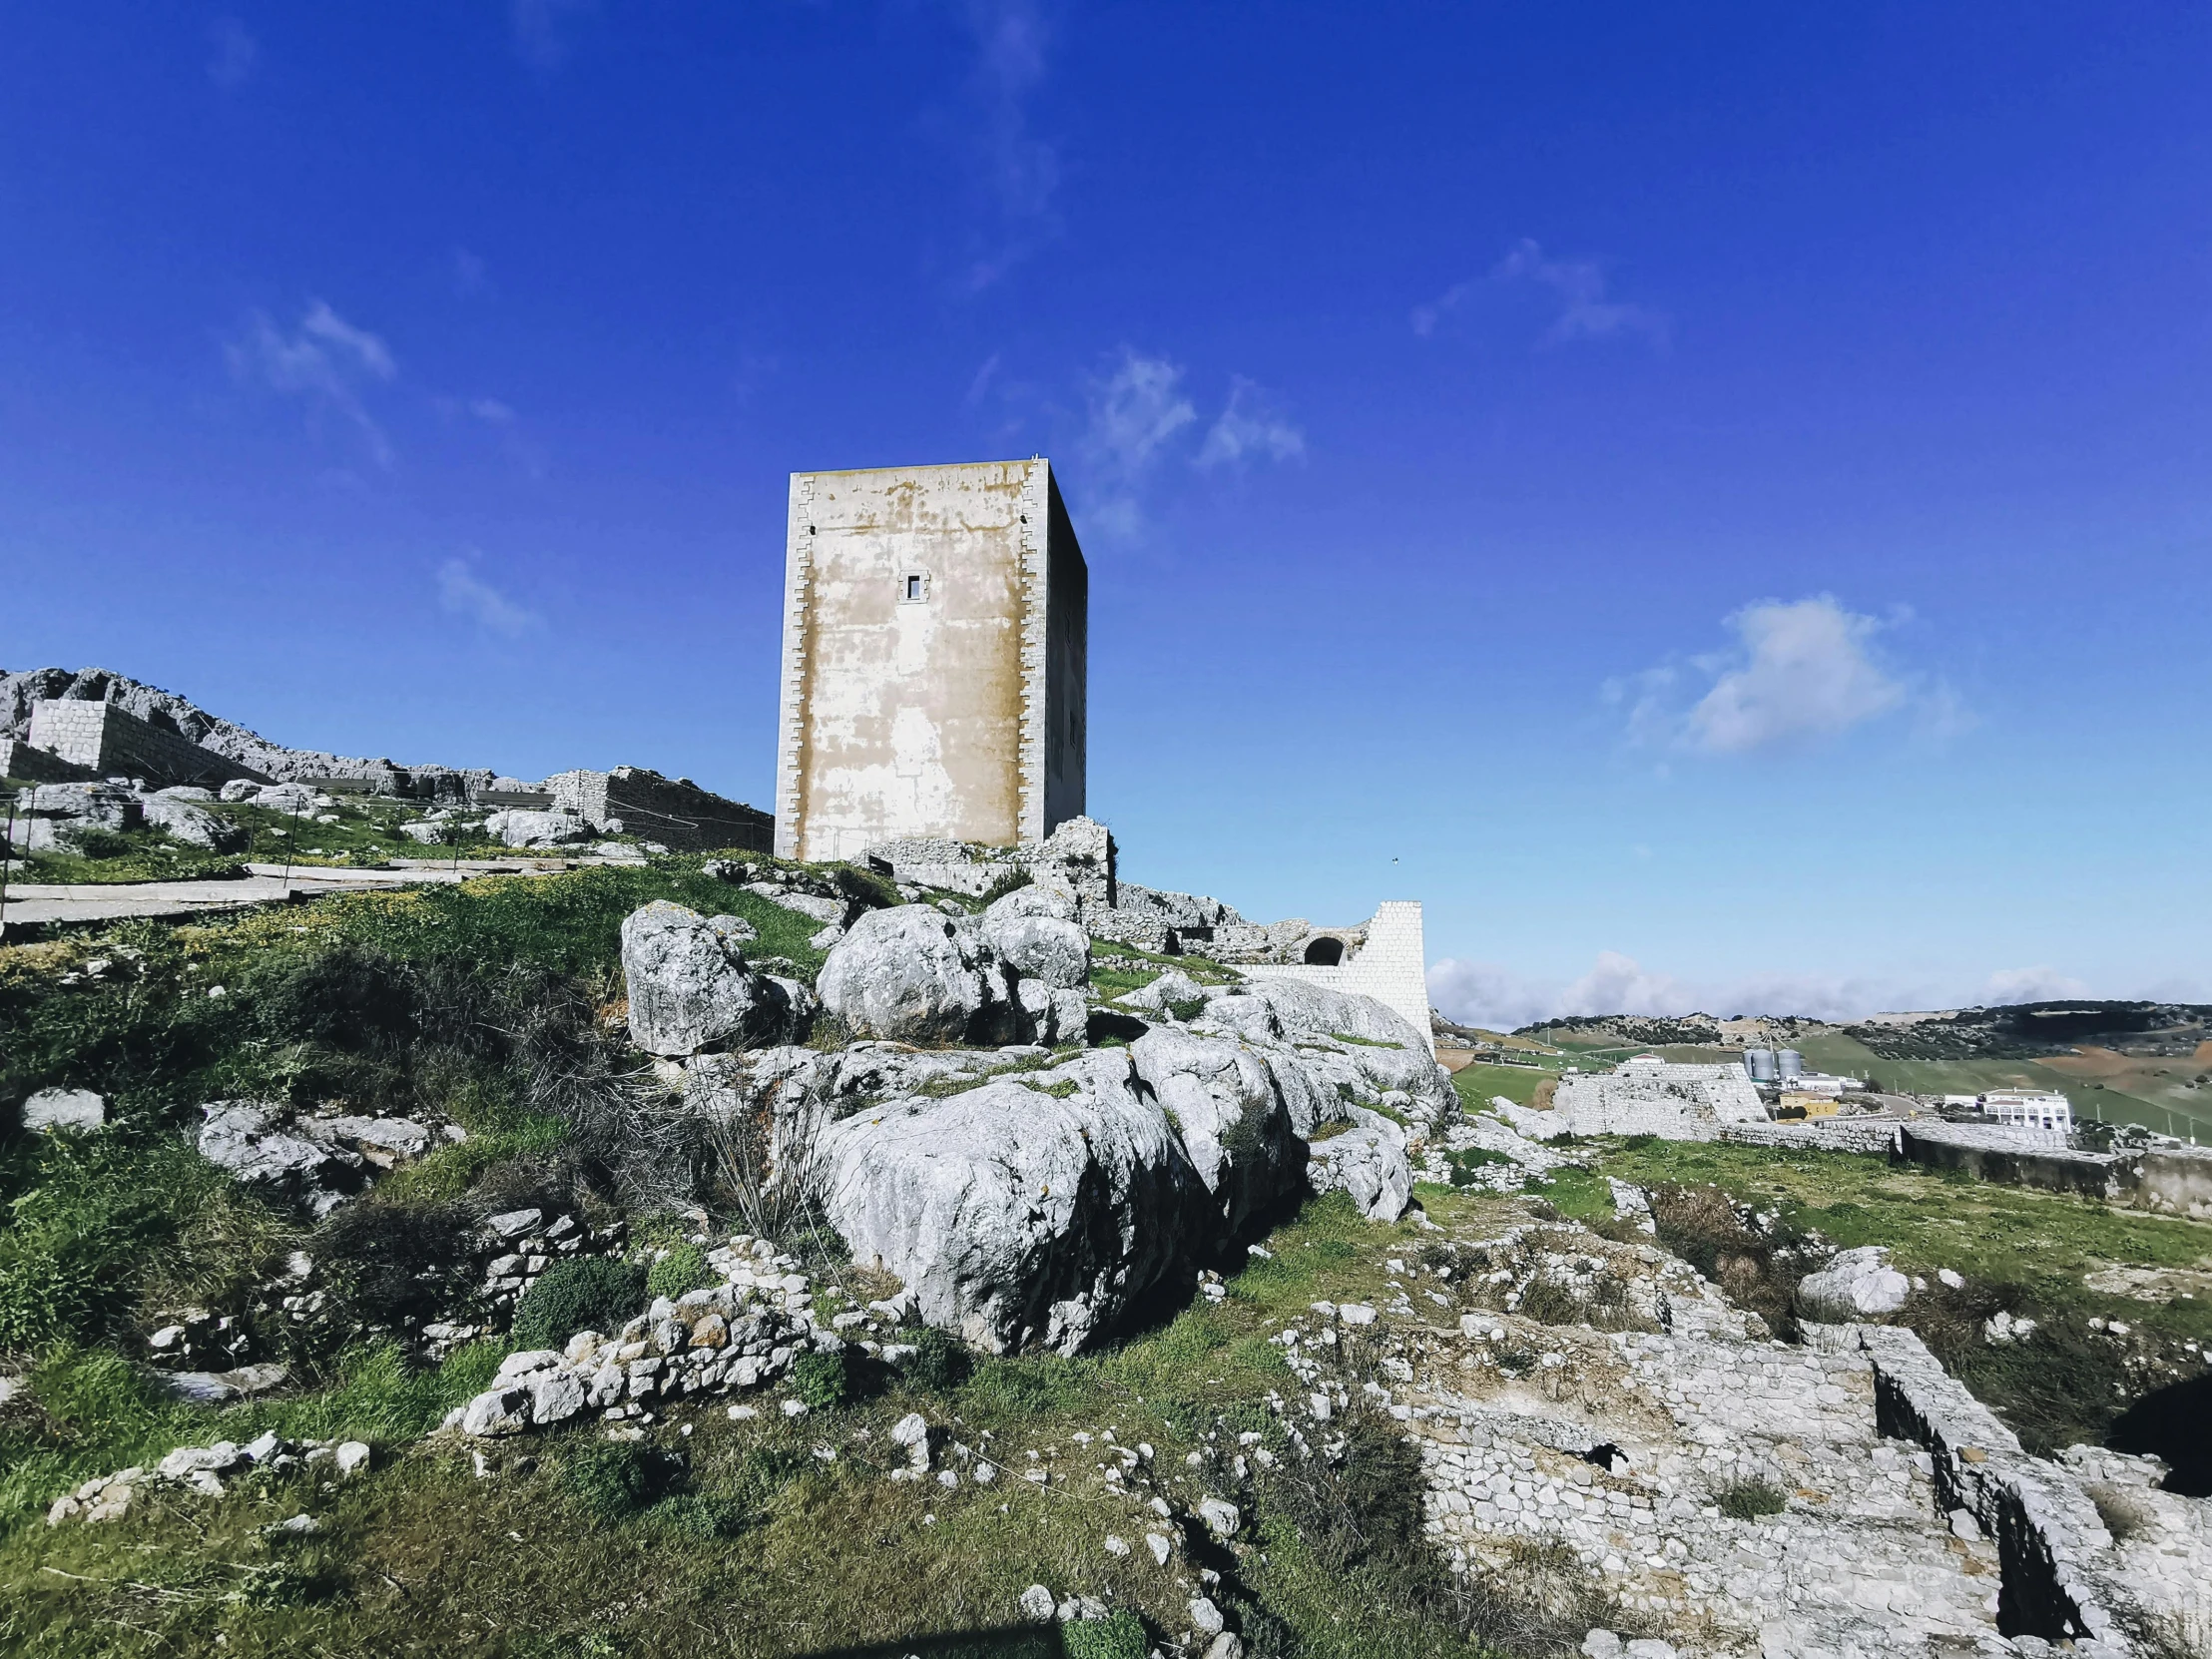 an old tower on a hill surrounded by rocks